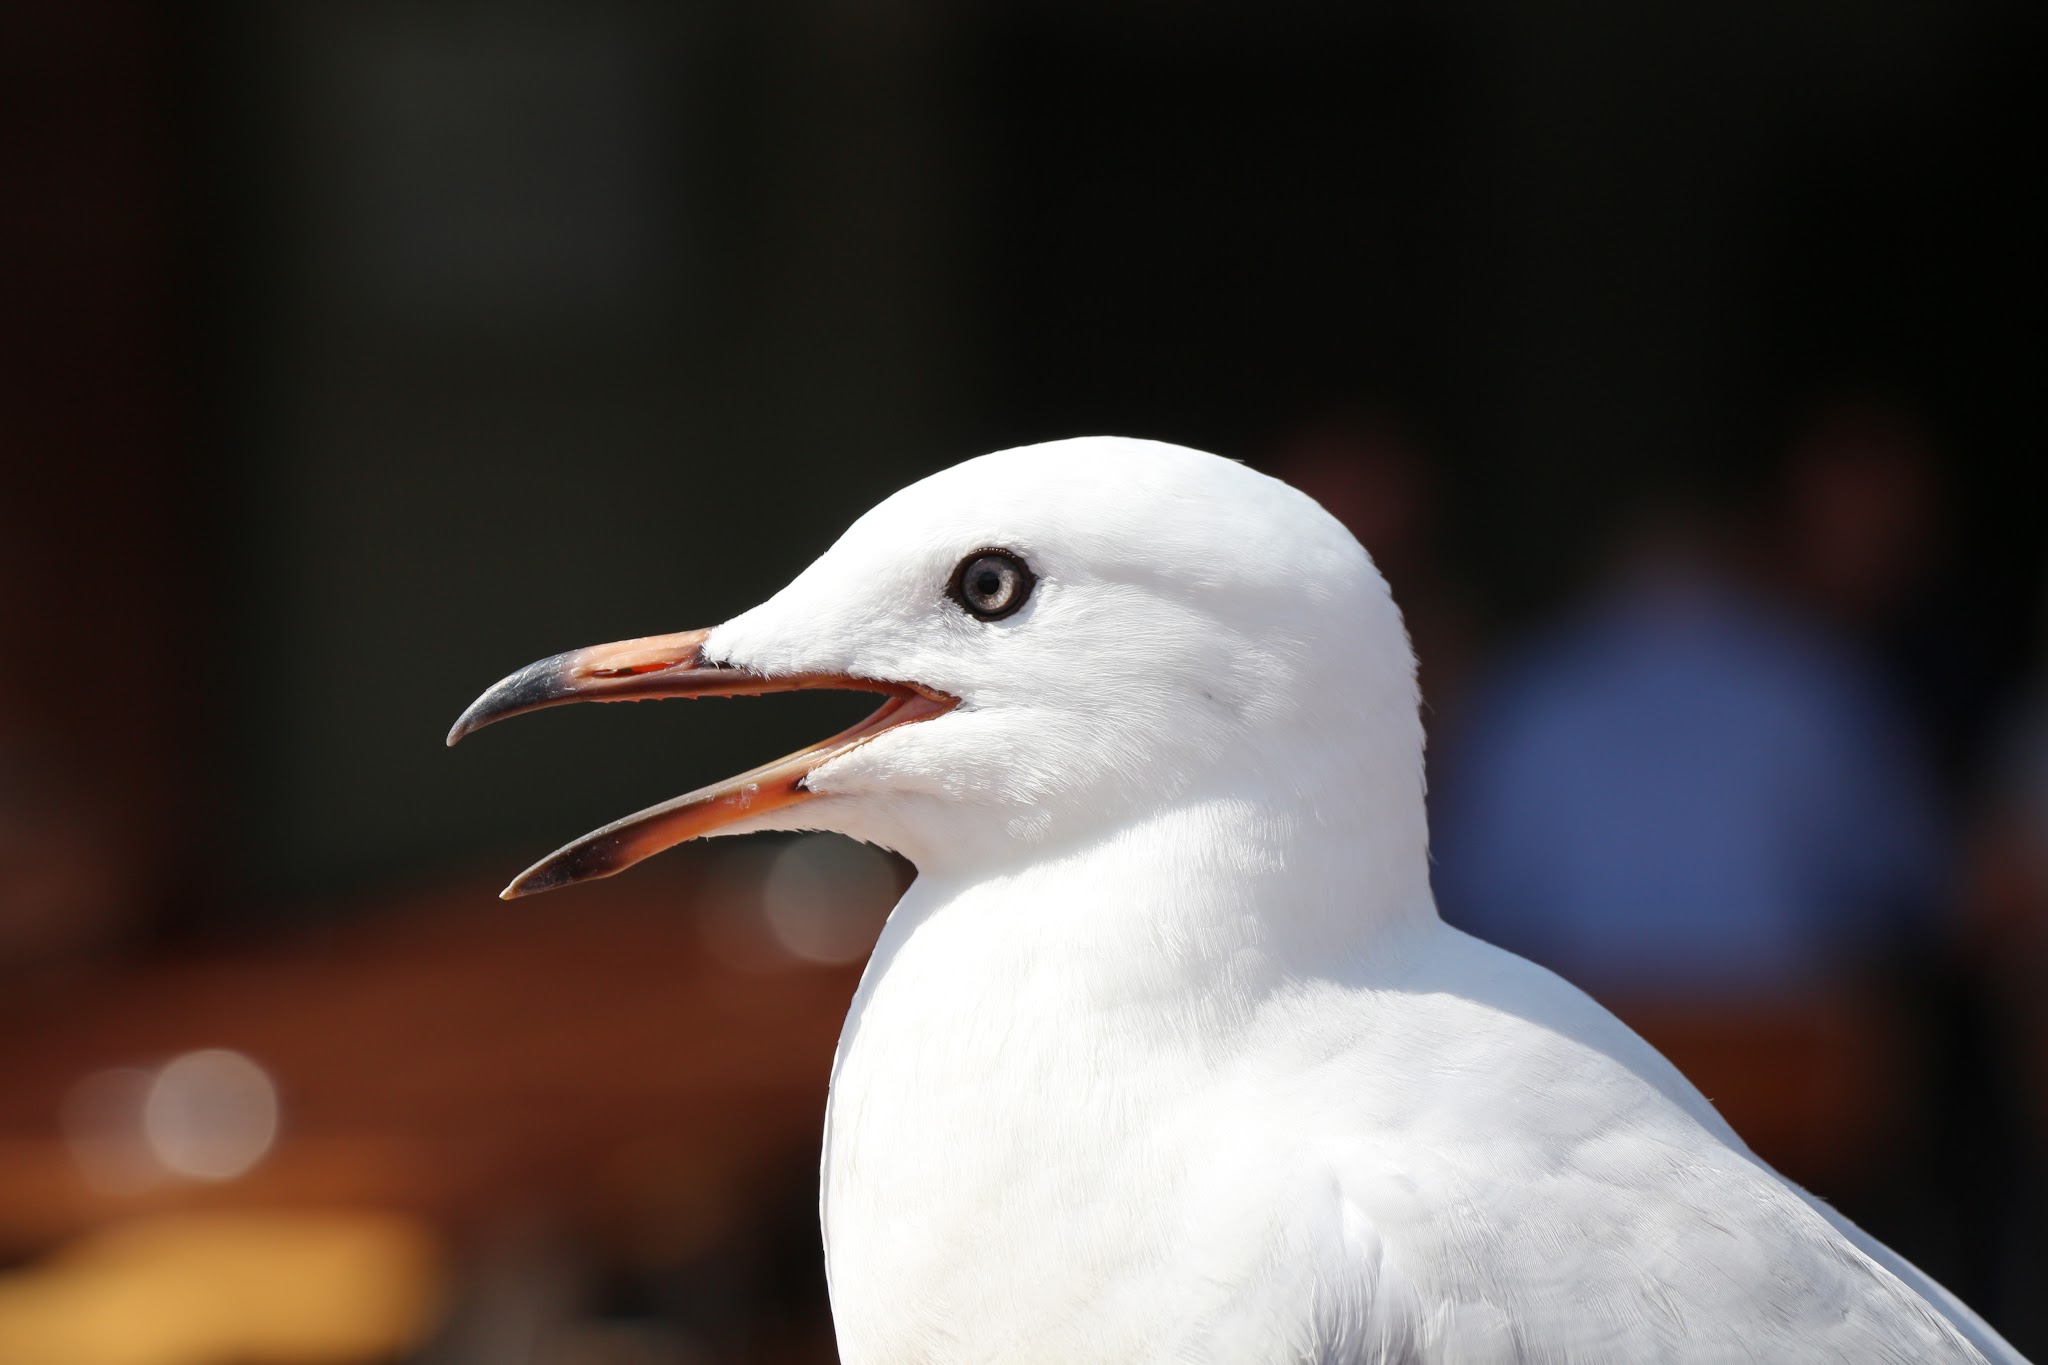 Close-up of the head of a silver gull in profile view with its bill open. It has bright white feathers, a reddish bill that's black at the tip, a pale eye, and a dark black eye ring that looks almost like eyeliner.
